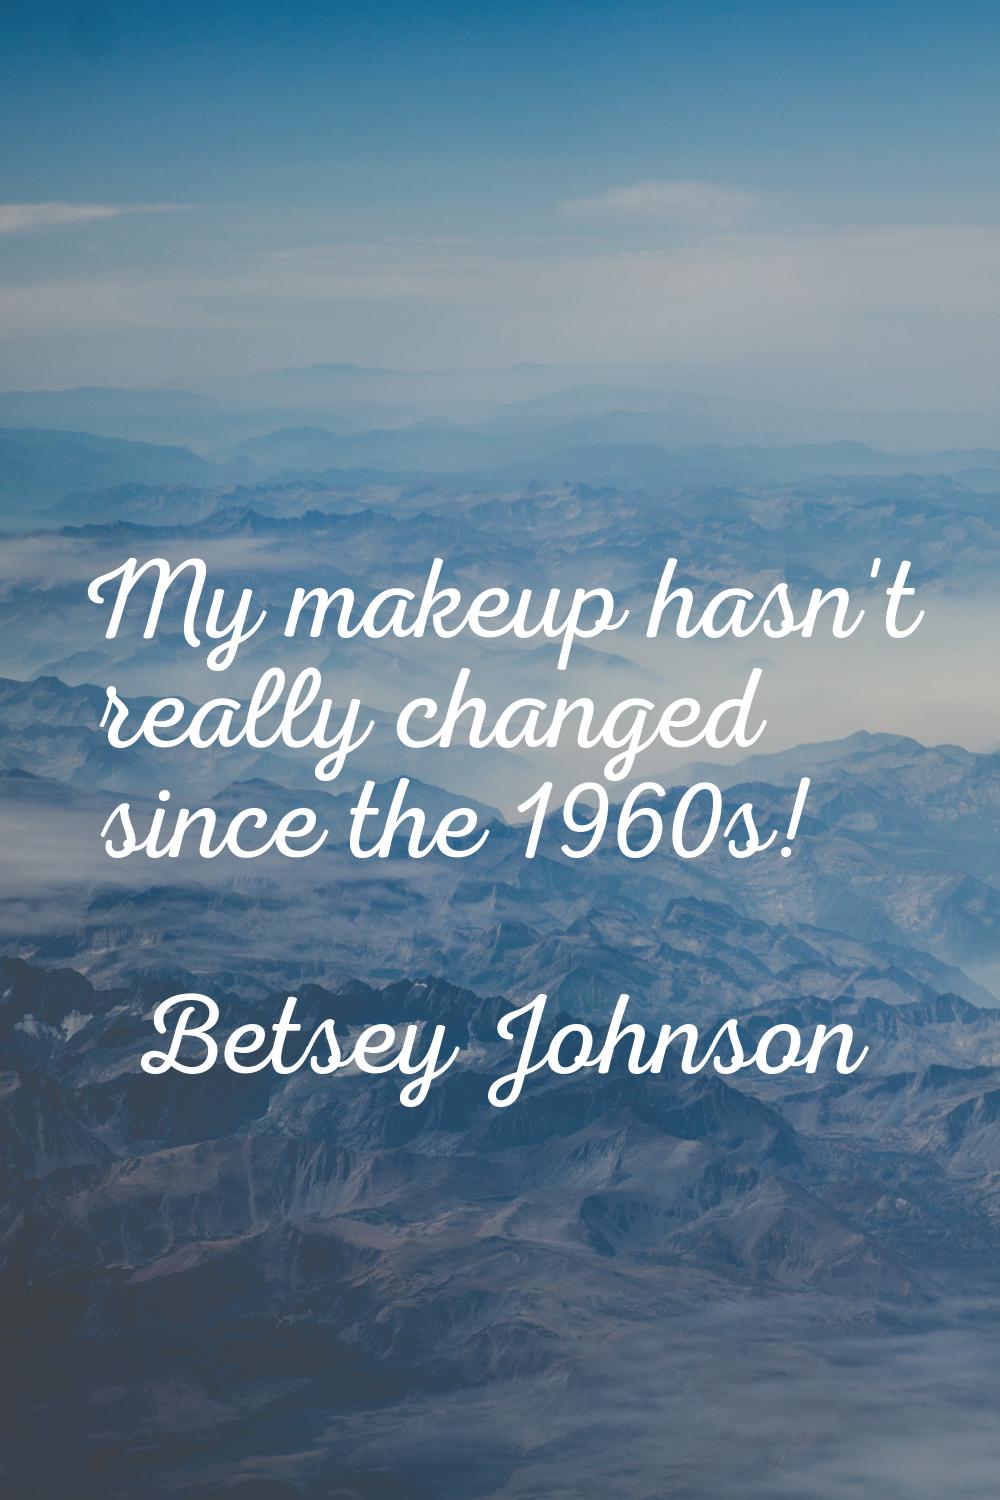 My makeup hasn't really changed since the 1960s!